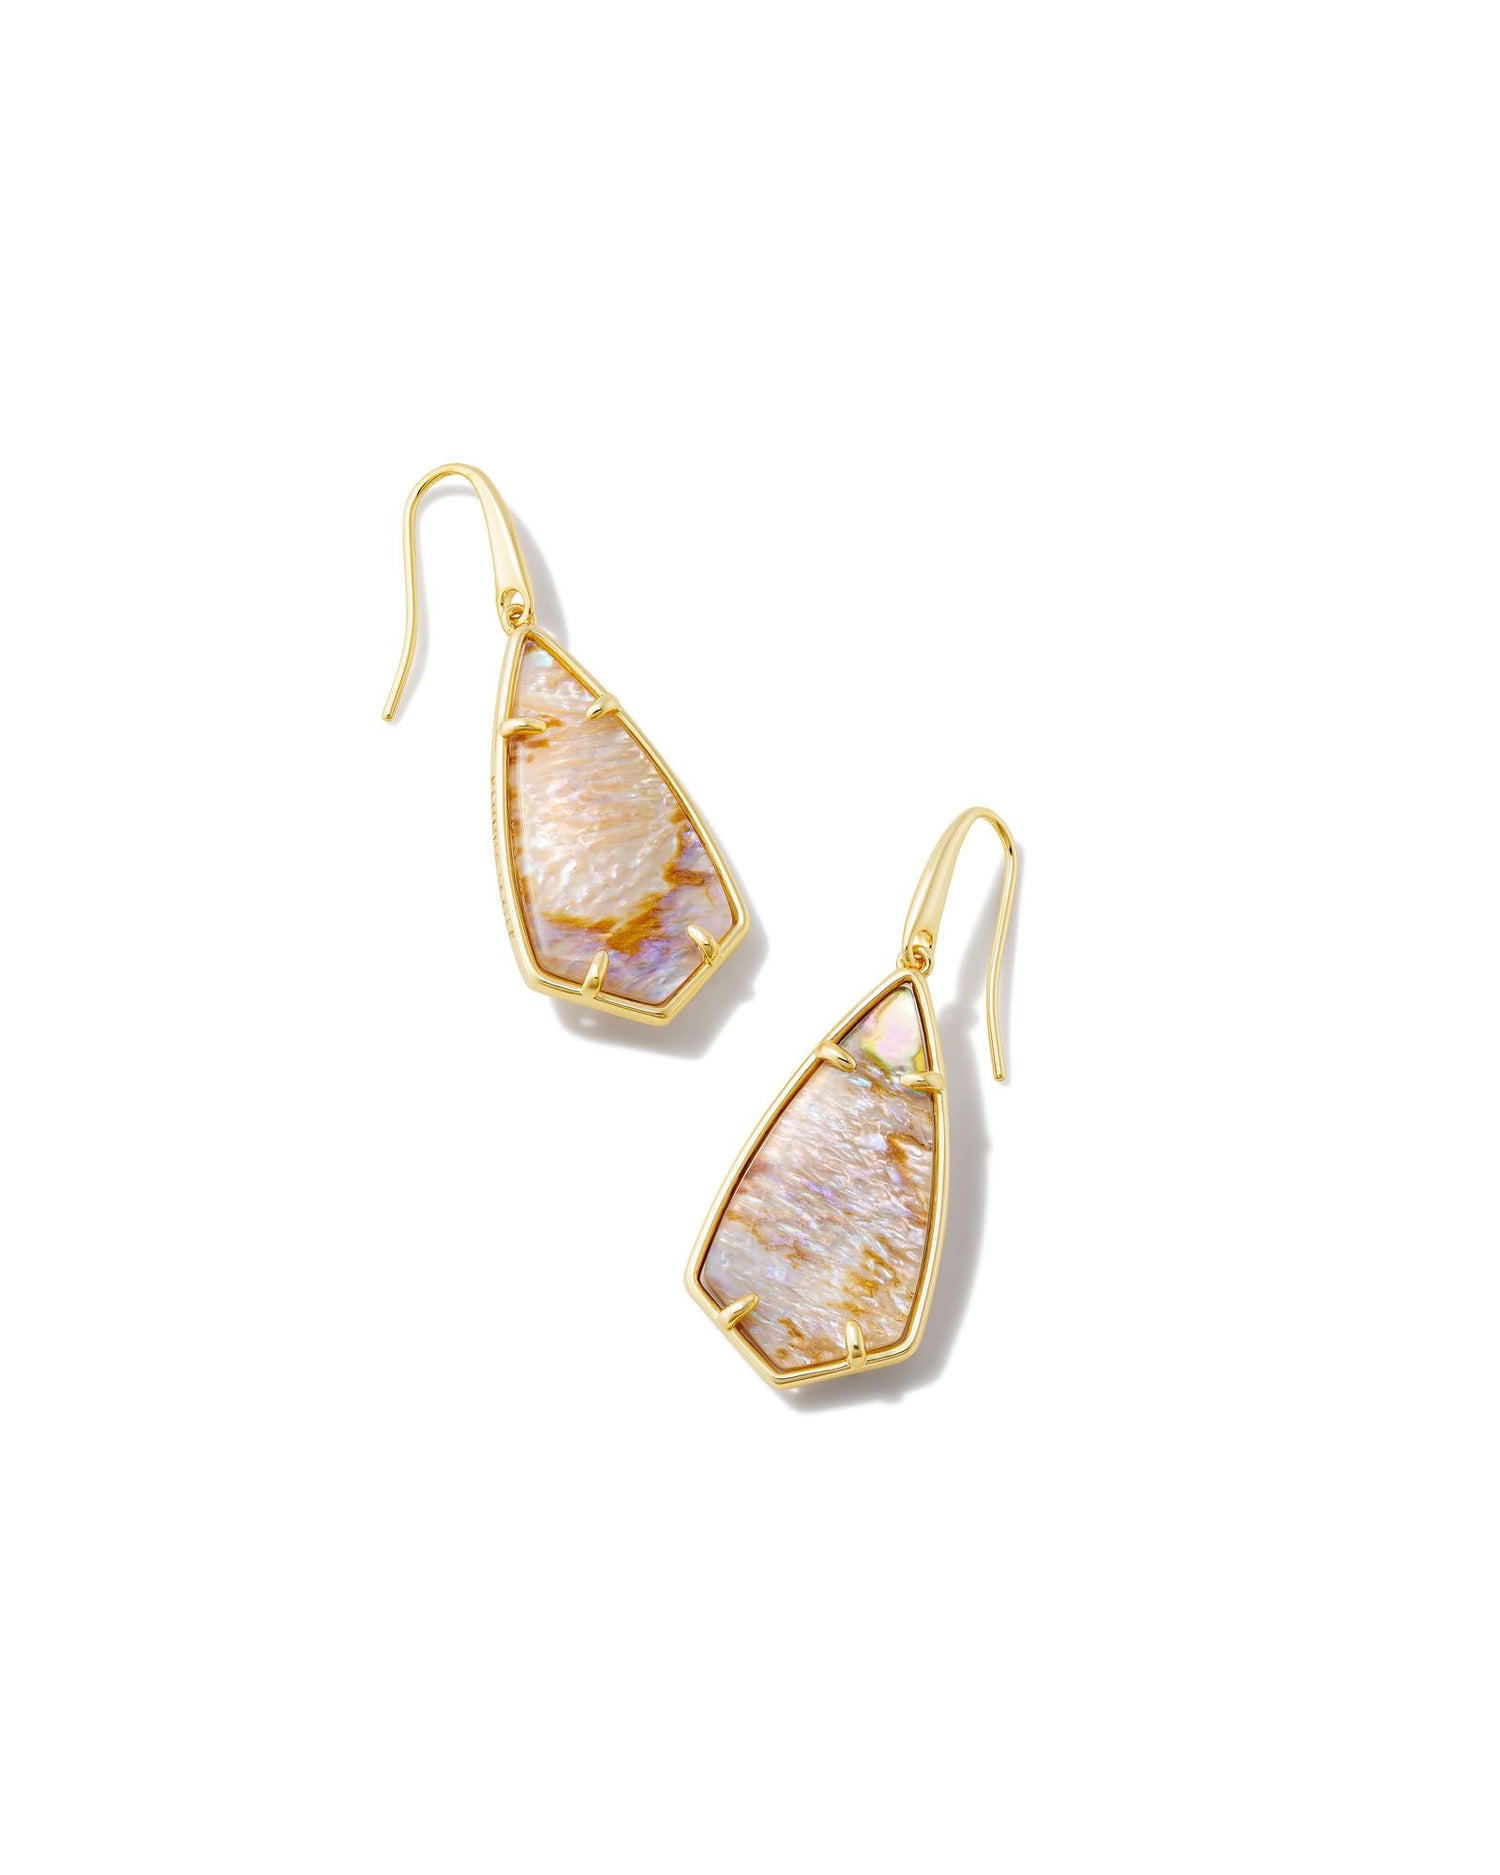 With their elongated, face-framing silhouette, the Camry Gold Drop Earrings look good on everyone. Featuring our archival Camry stone shape with a sleek new metal frame, these earrings add the finishing touch to any outfit. This metal is 24k gold plated over brass with sandstone mother of pearl stones. 